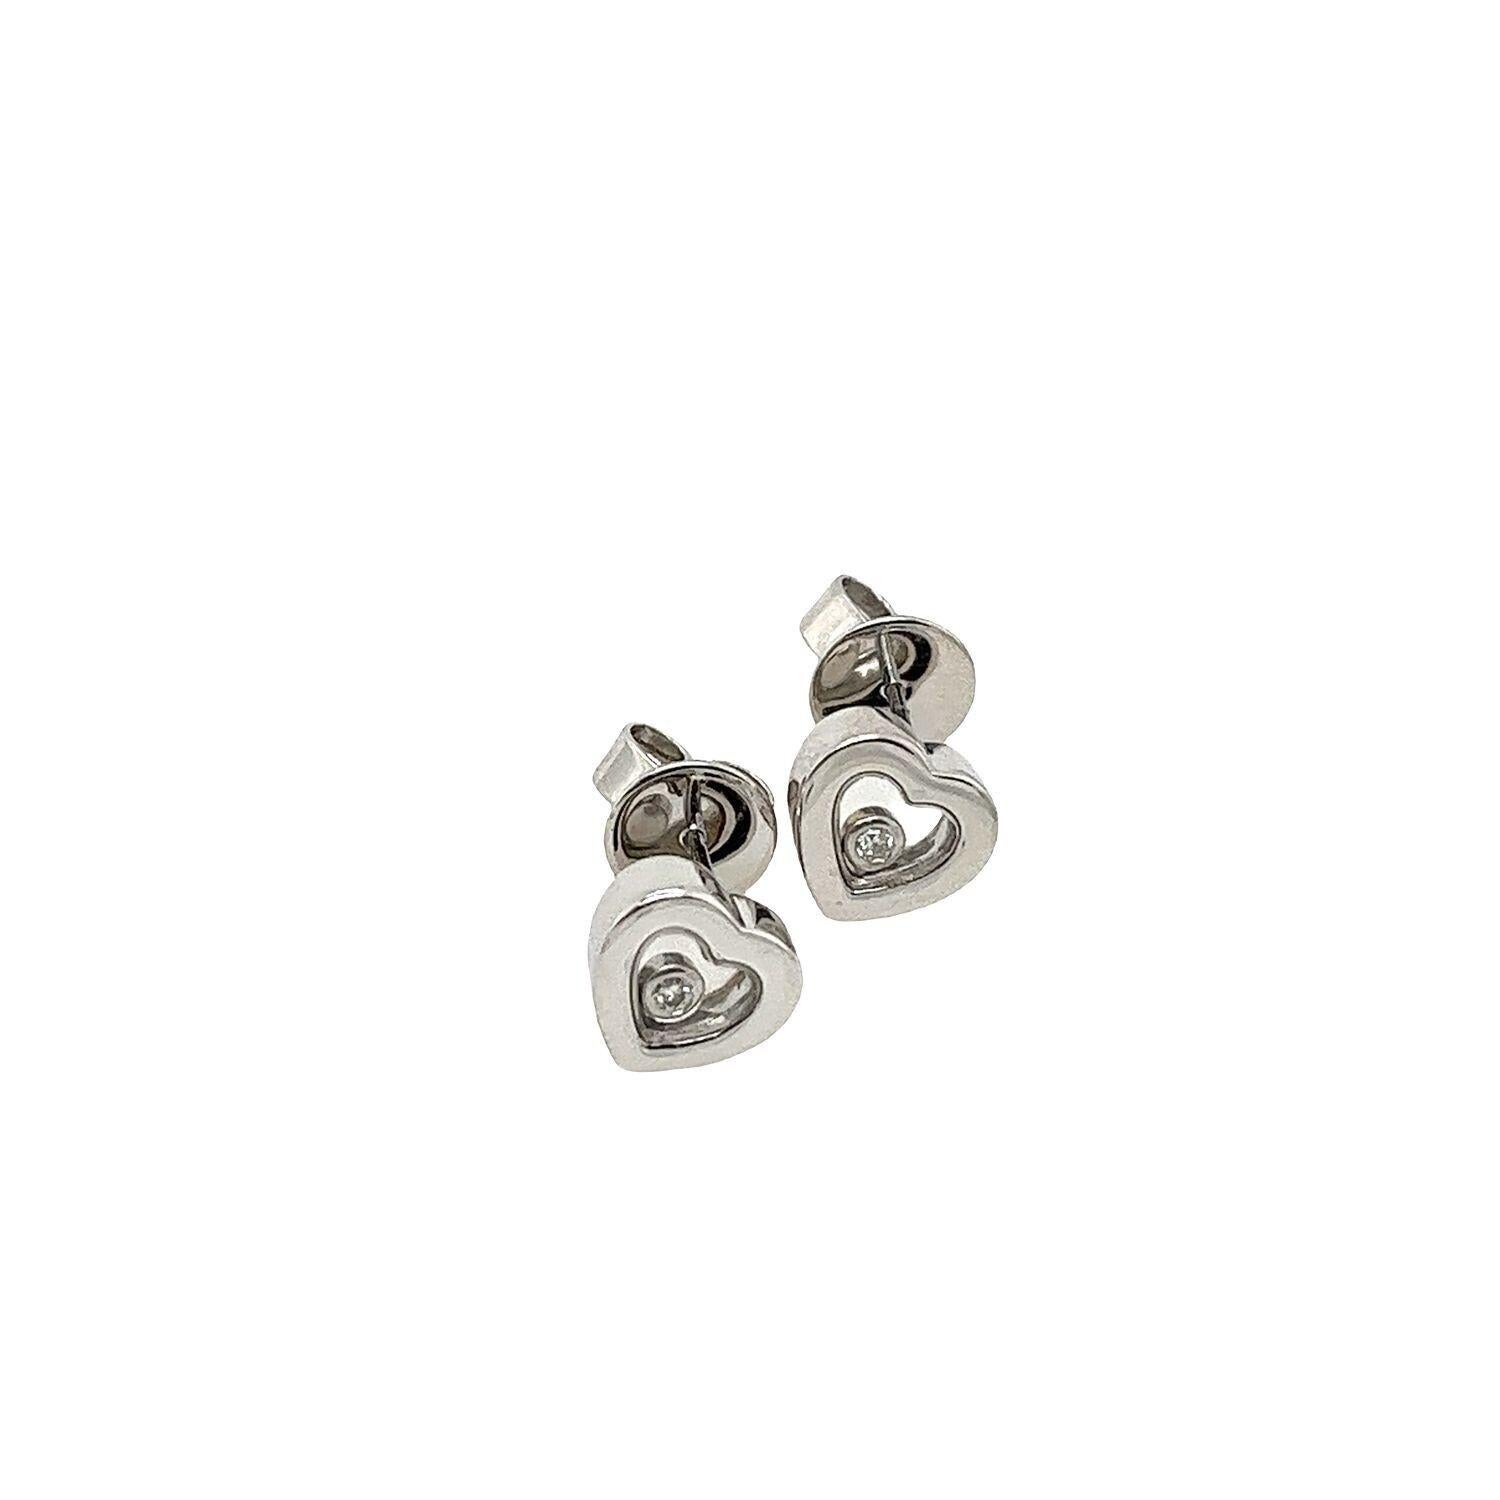 This pair of Diamond stud earrings features 2 floating round brilliant cut Diamonds set in 18ct White Gold in a heart shape. It's perfect for every day and can be worn with any outfit.

Additional Information:
Diamond Colour: F
Diamond Clarity: